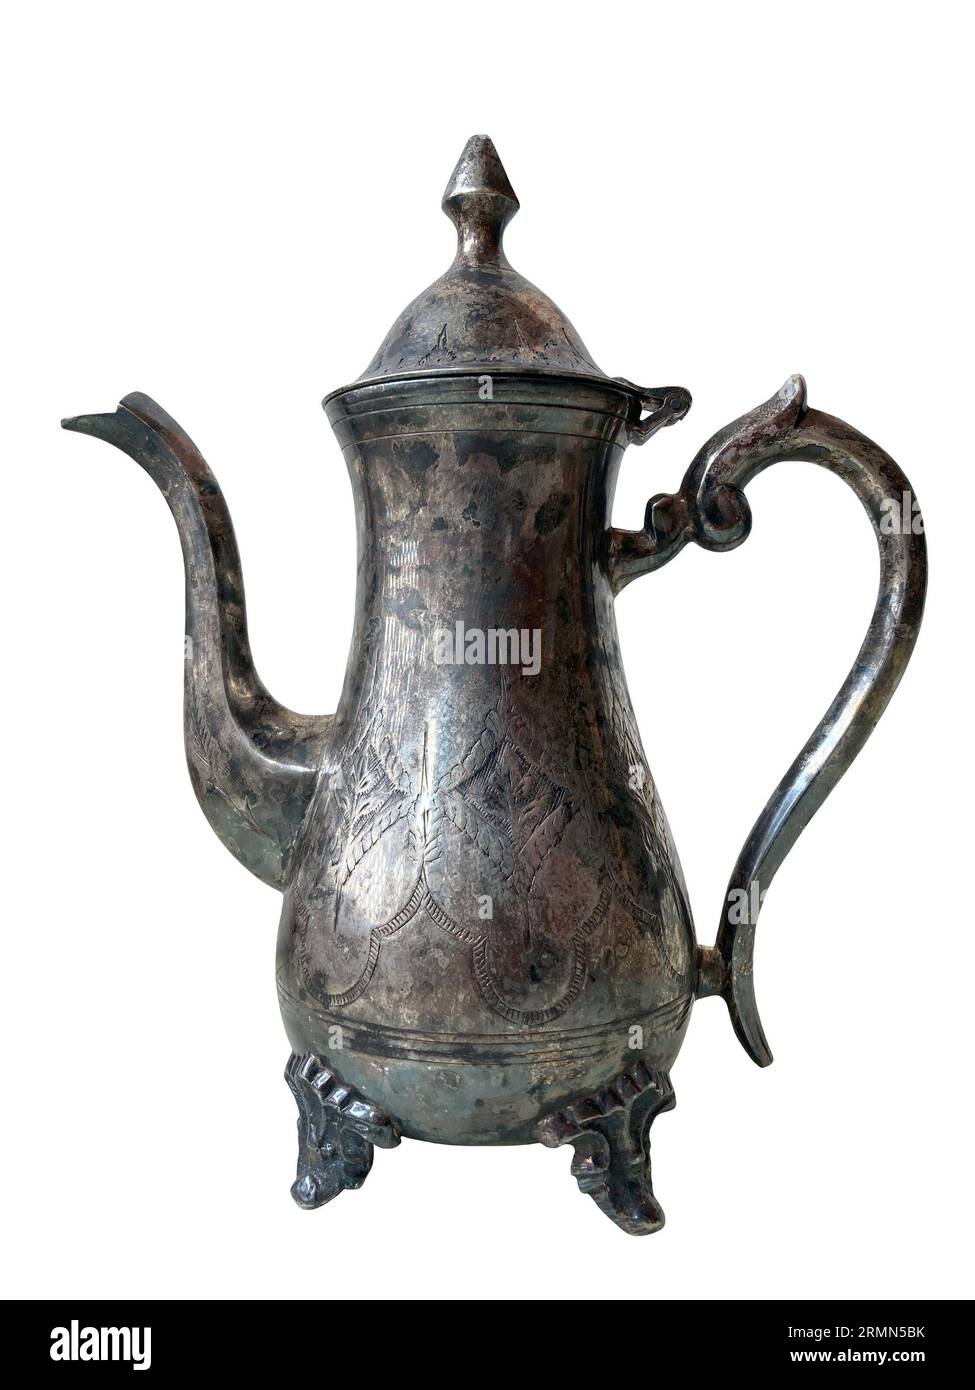 https://c8.alamy.com/comp/2RMN5BK/coffee-pot-old-antique-silver-ware-isolated-on-white-background-2RMN5BK.jpg